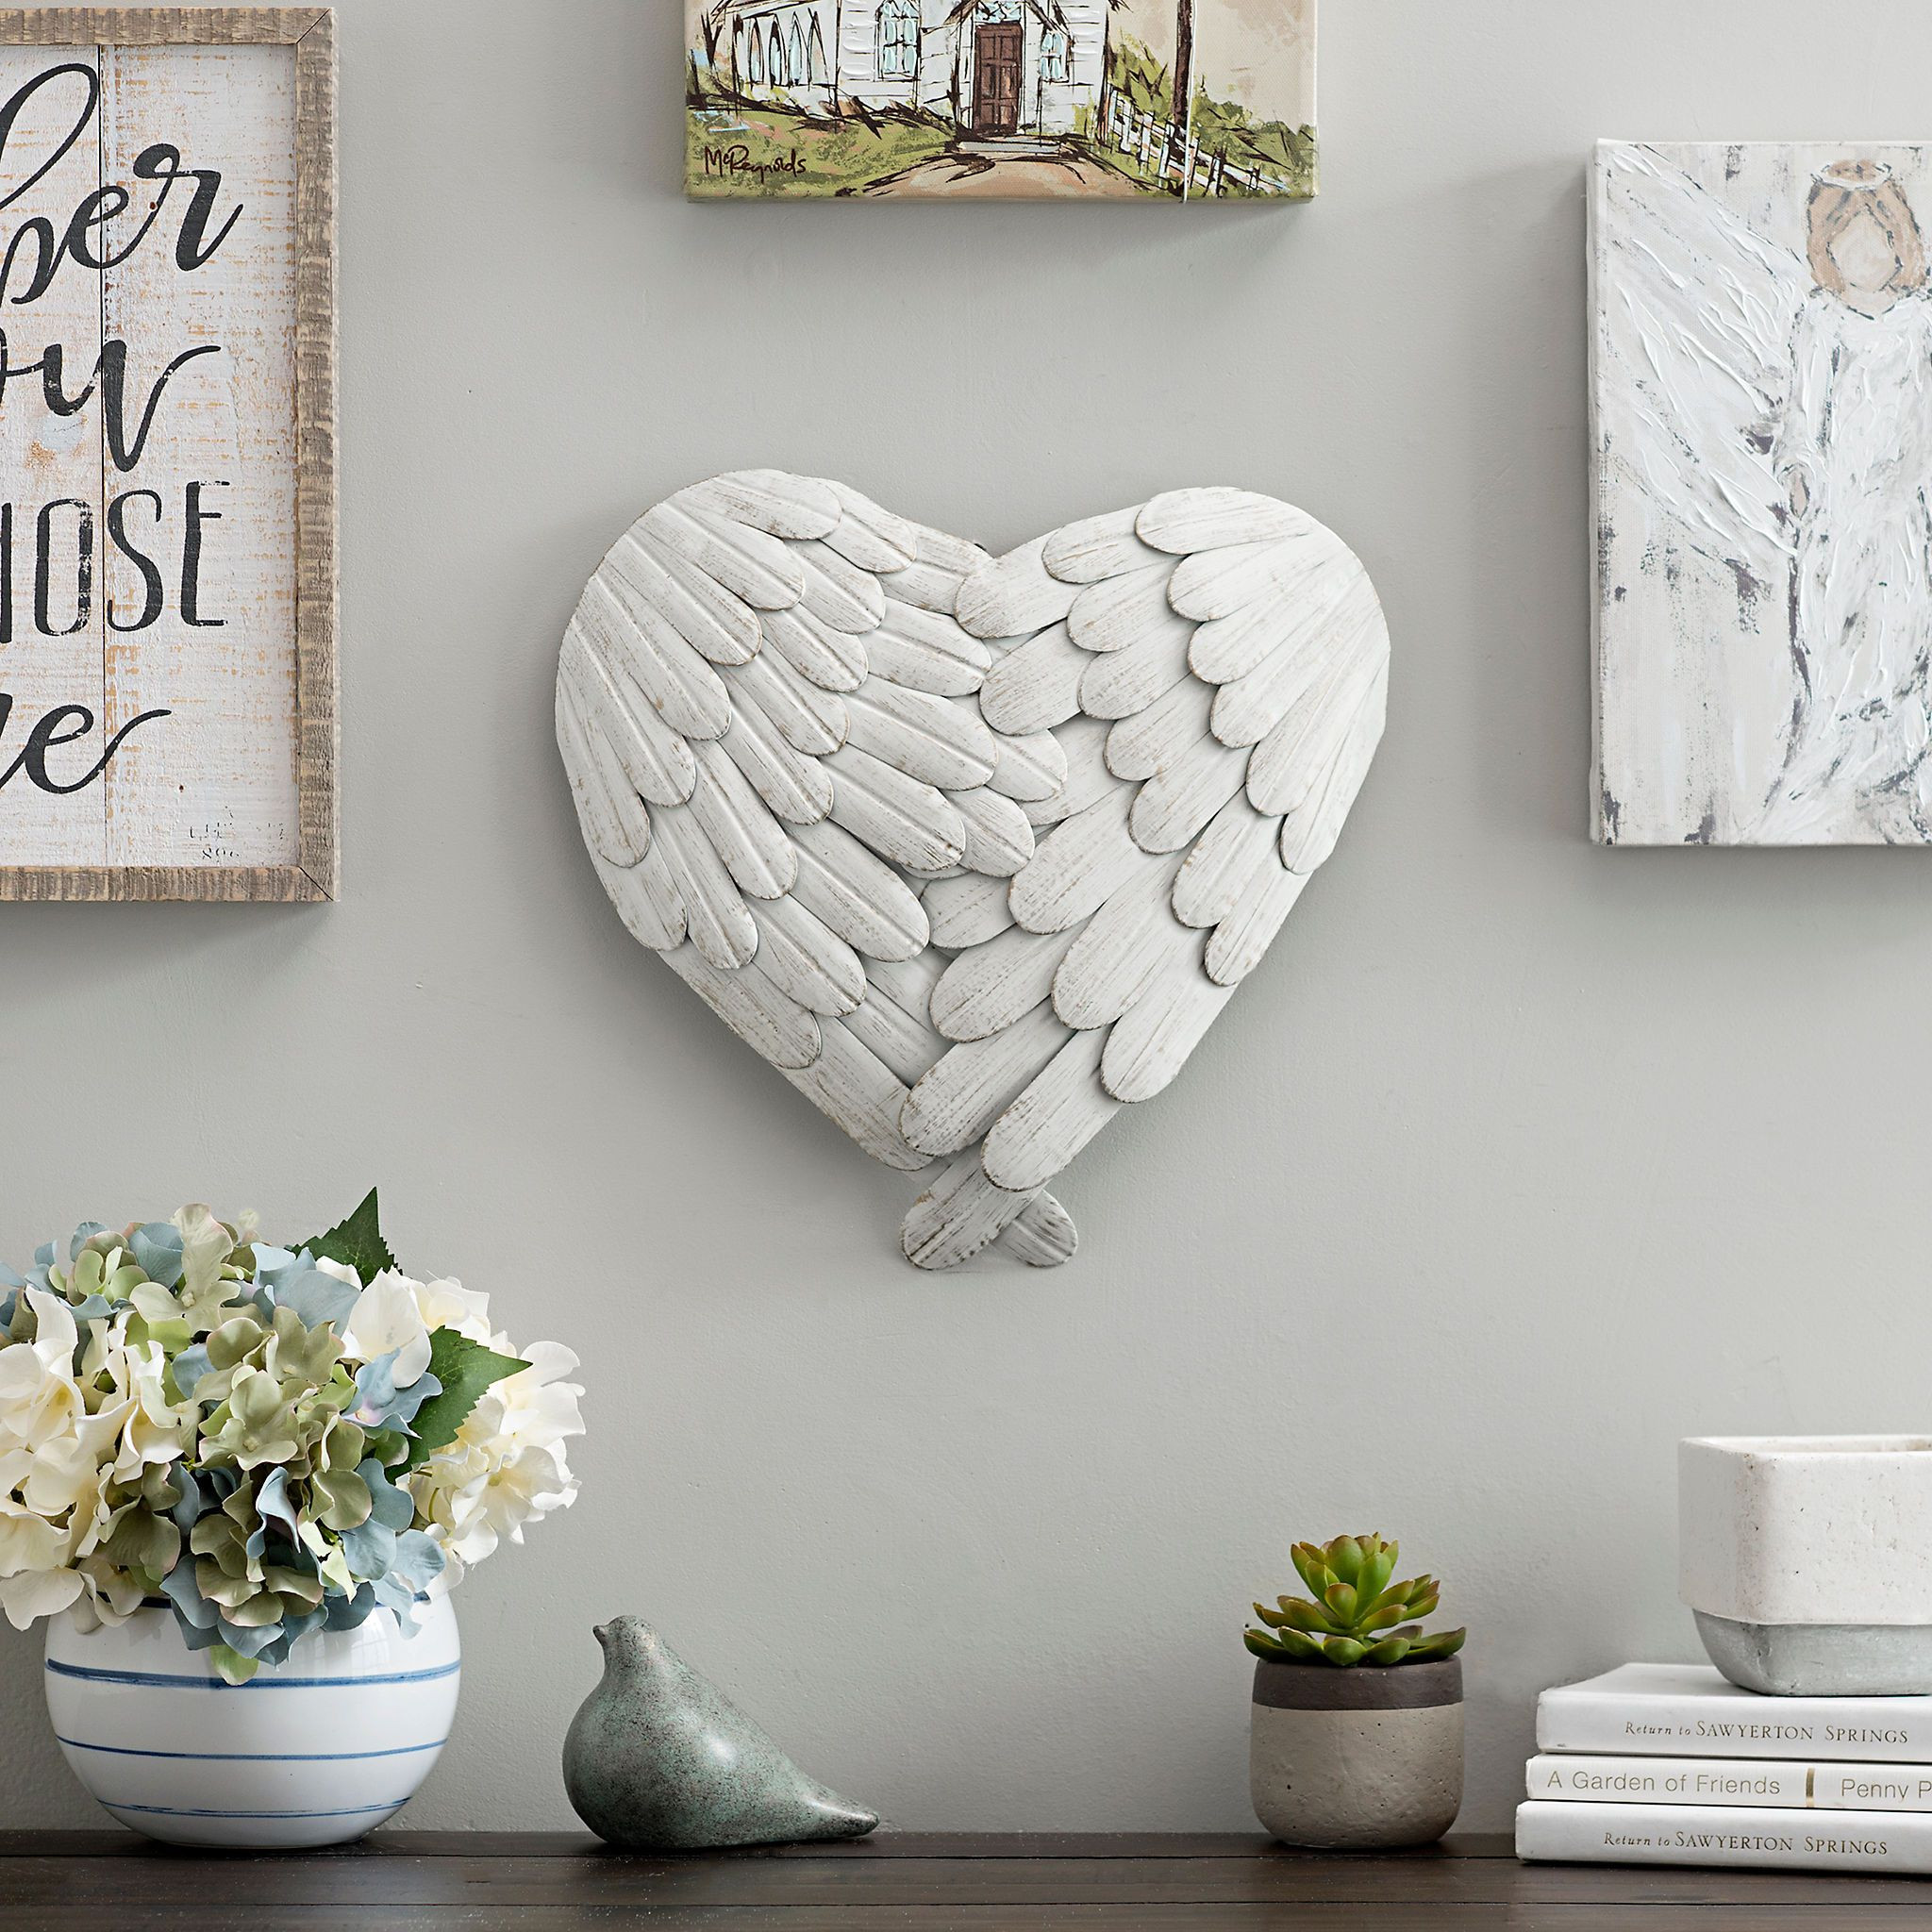 DIY Angel Wings Wall Decor
 4 Layered White Angel Wings Heart Wall Plaque